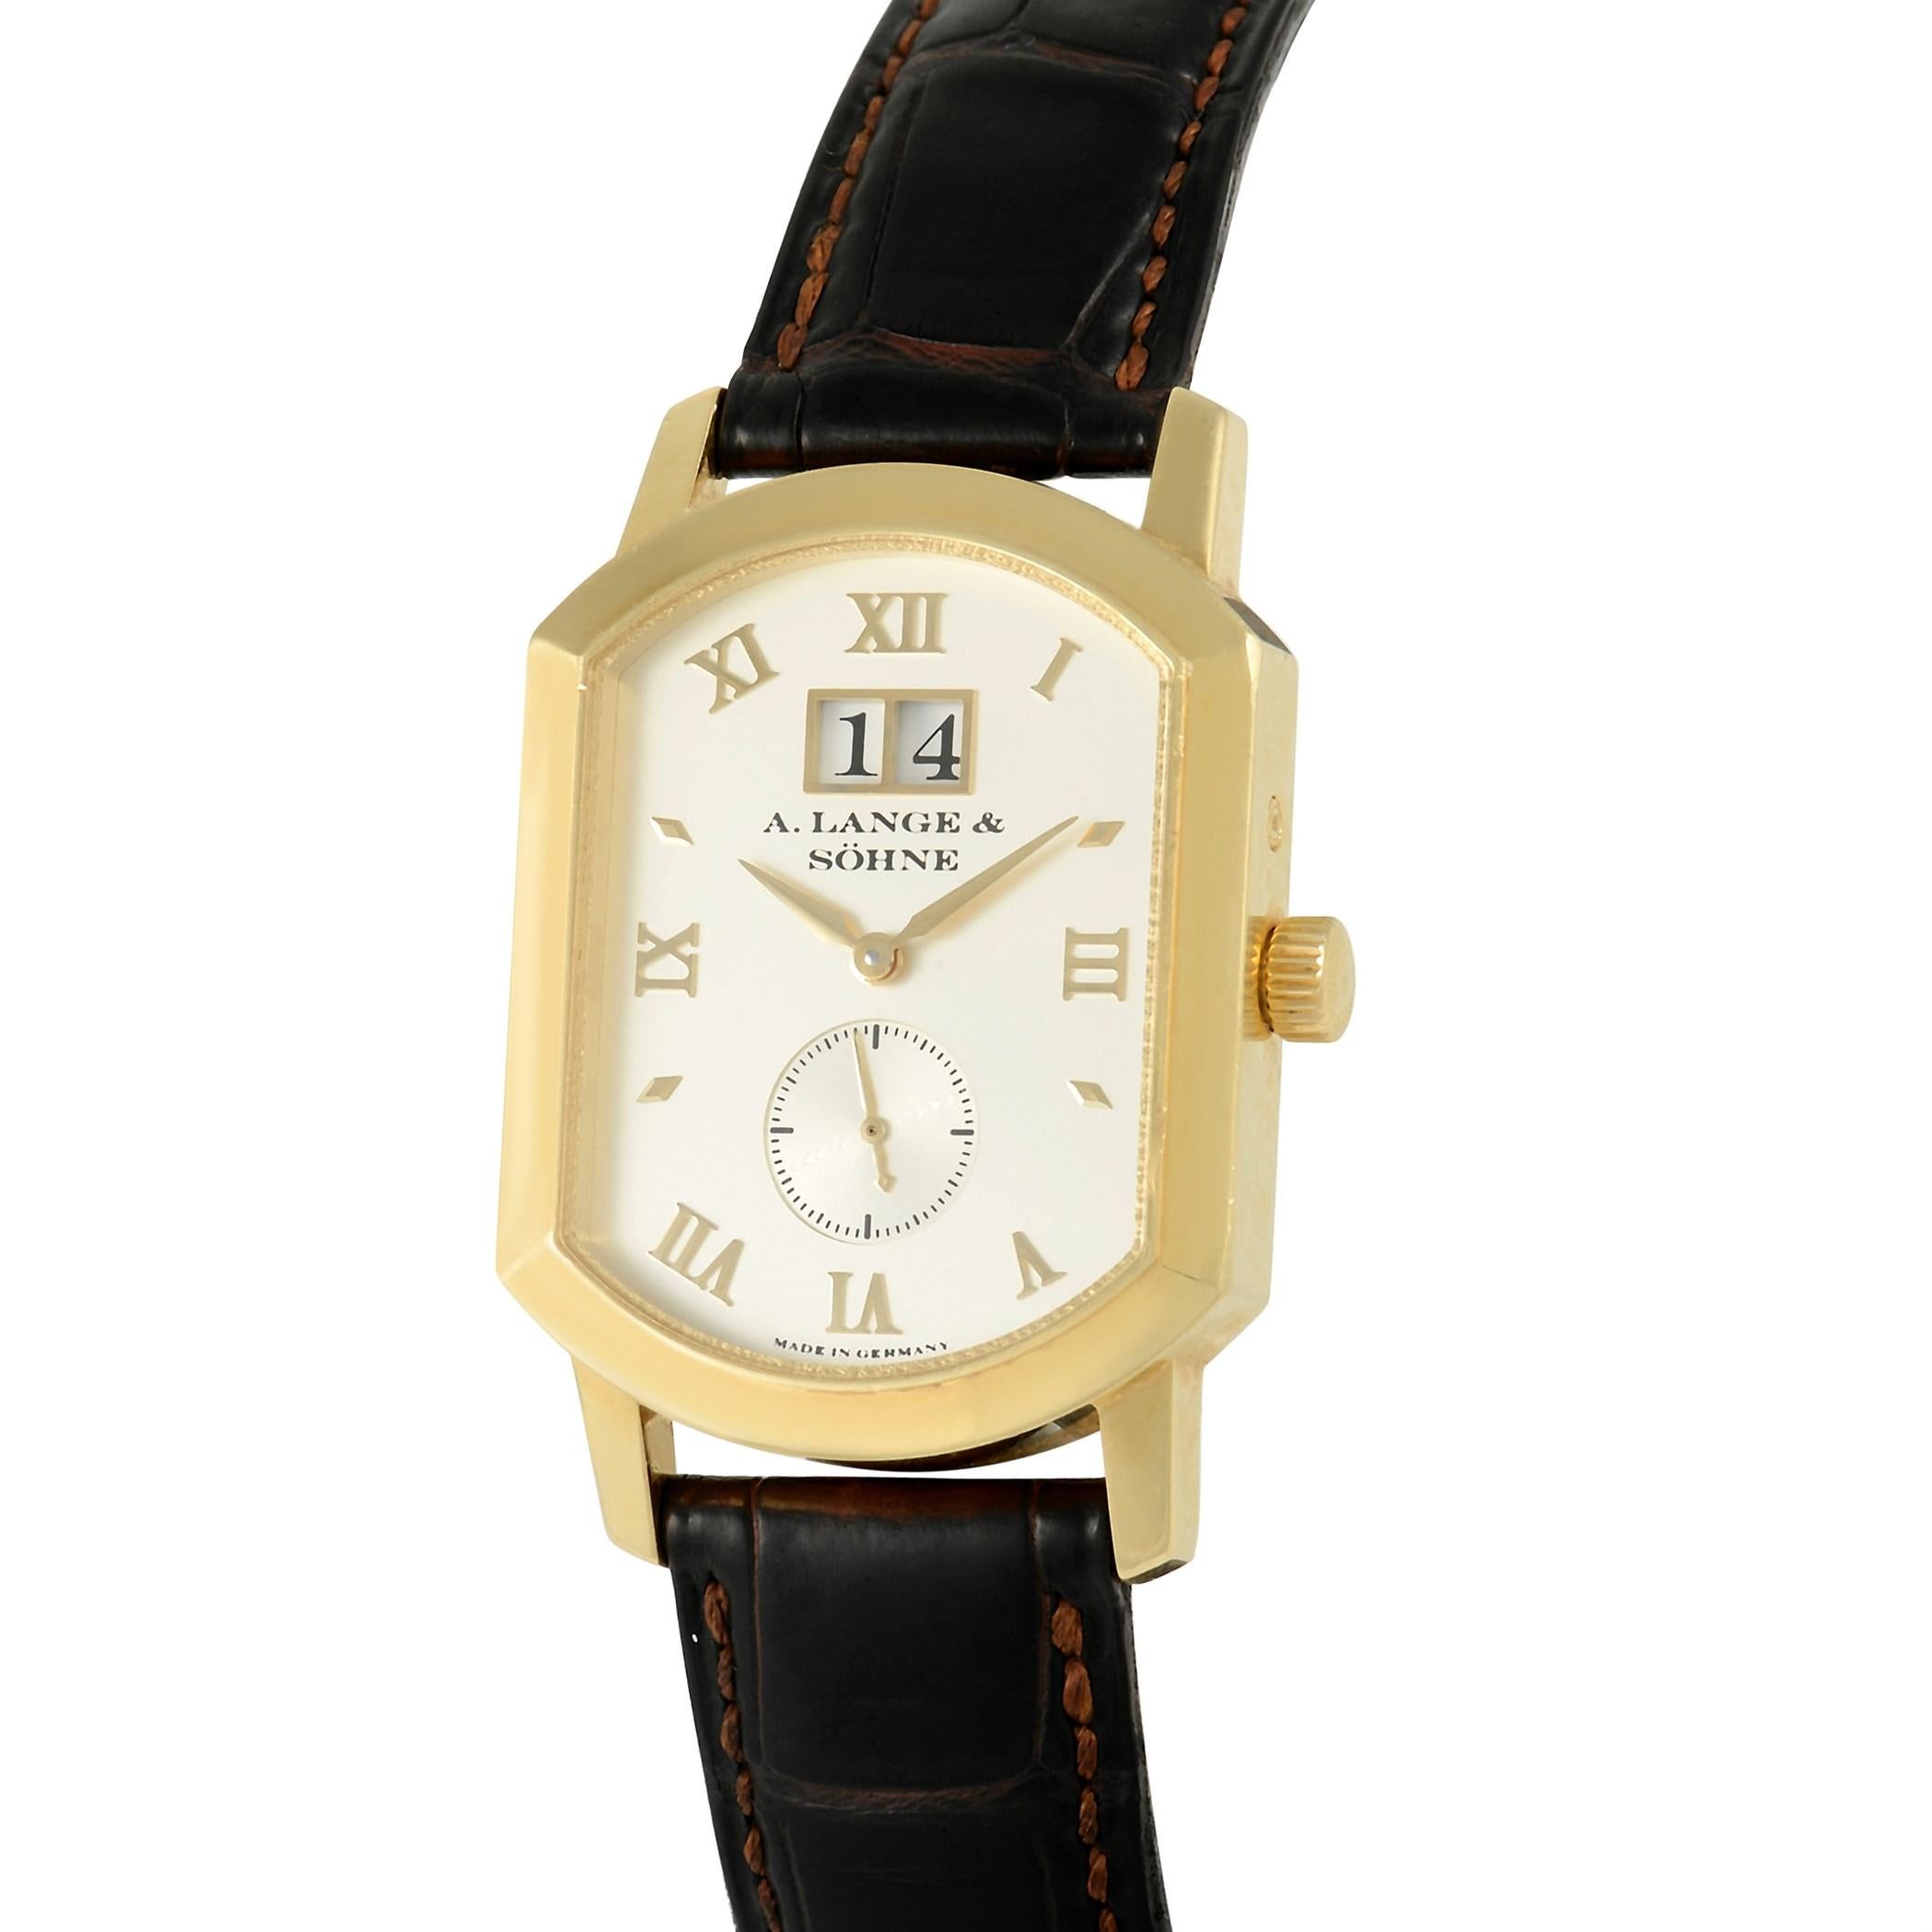 The A. Lange & Sohne Grand Arkade Watch, reference number 106.021, is a sophisticated timepiece with an inherent sense of refinement.

This watch includes an oval-shaped case crafted from 18K Yellow Gold. On the Champagne-colored dial, you’ll find